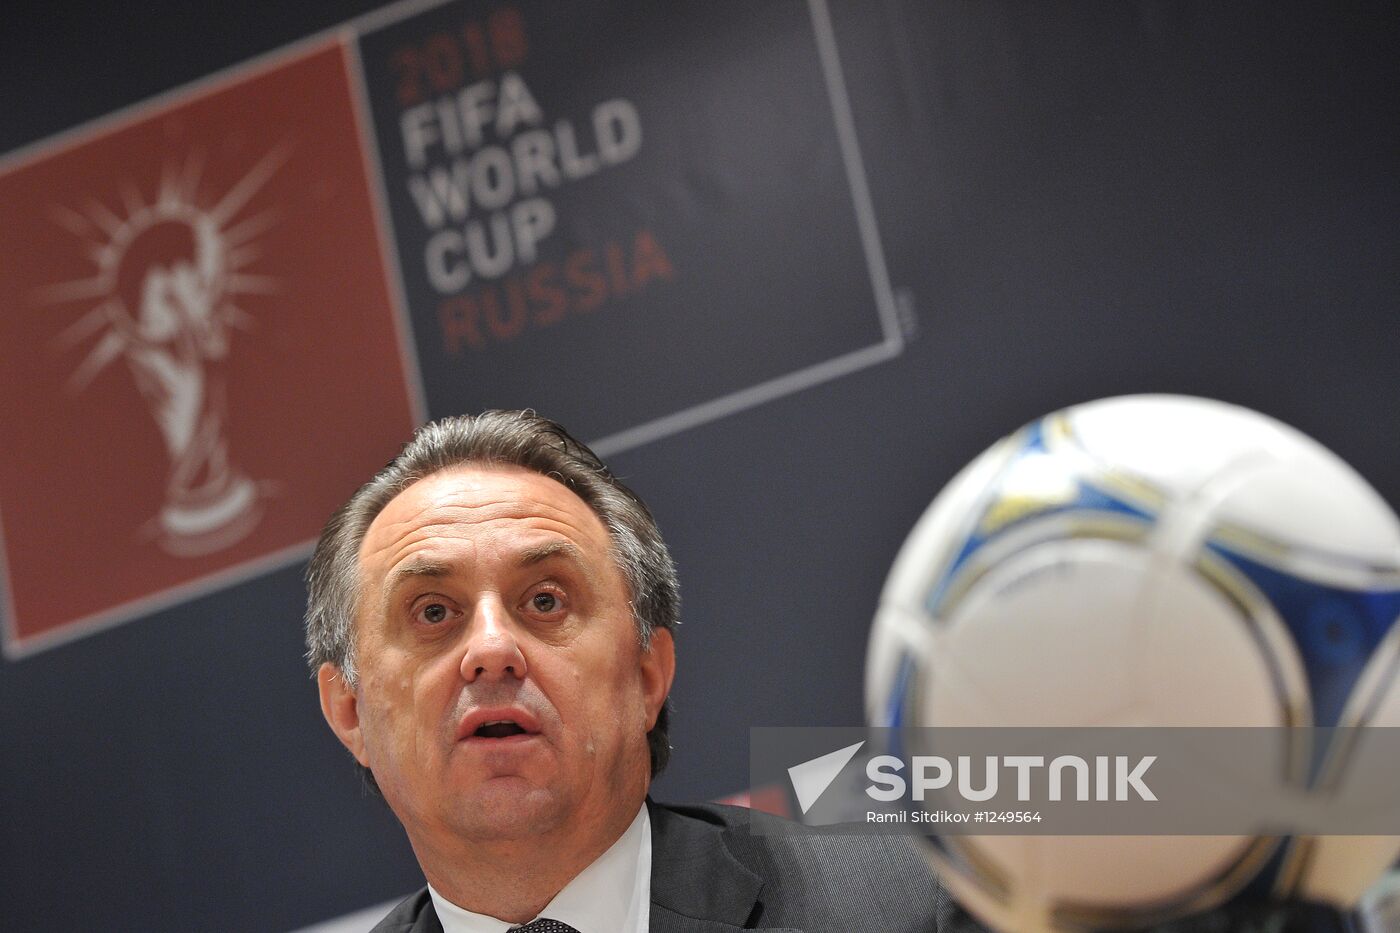 Russia-2018 organizing committee and FIFA hold news conference